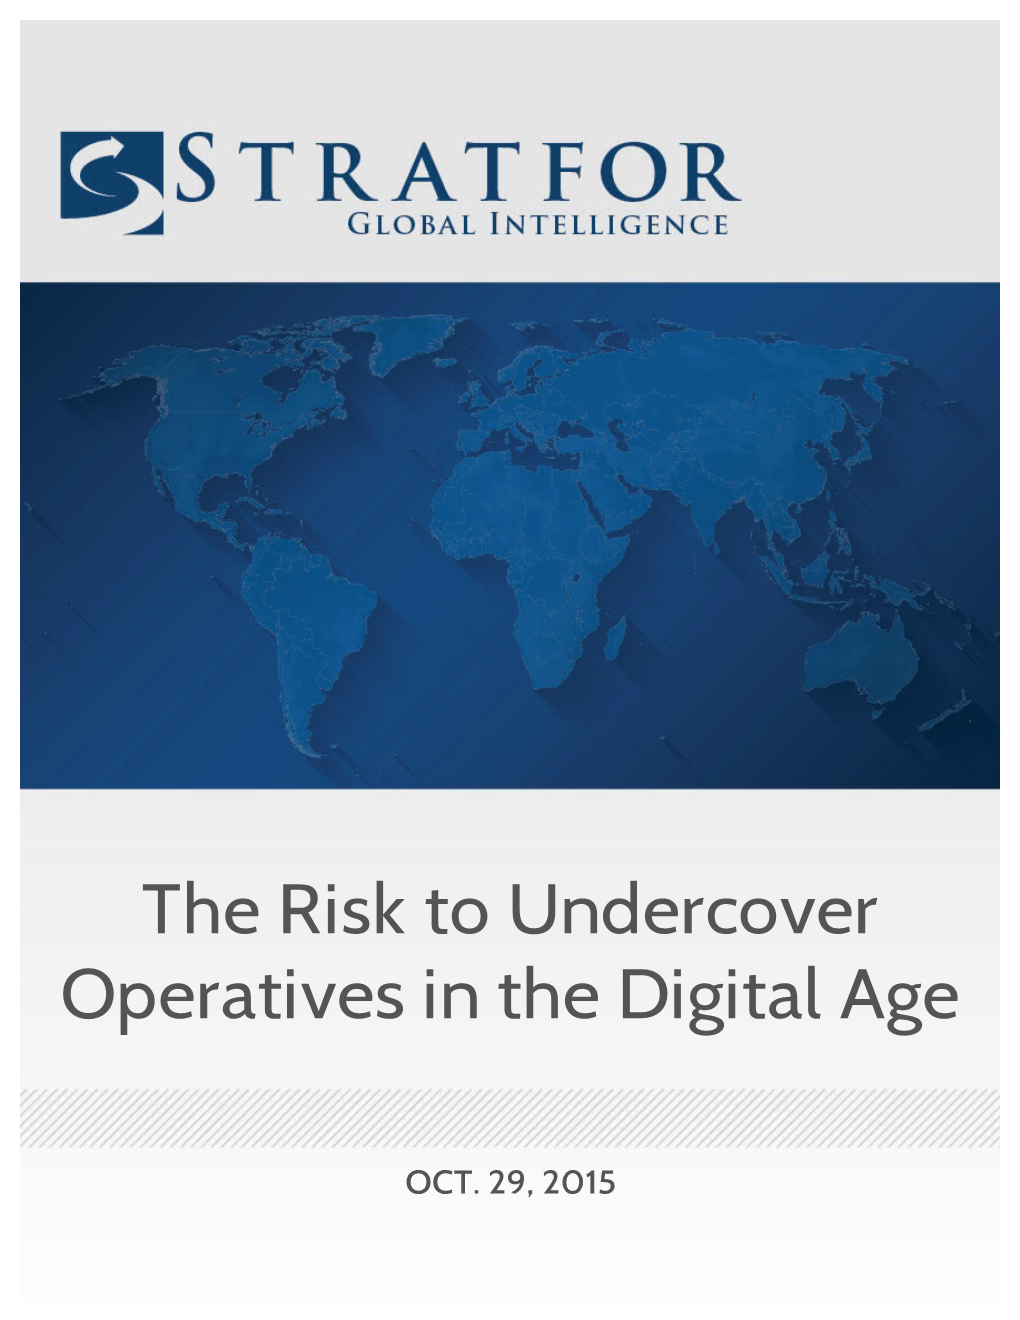 The Risk to Undercover Operatives in the Digital Age